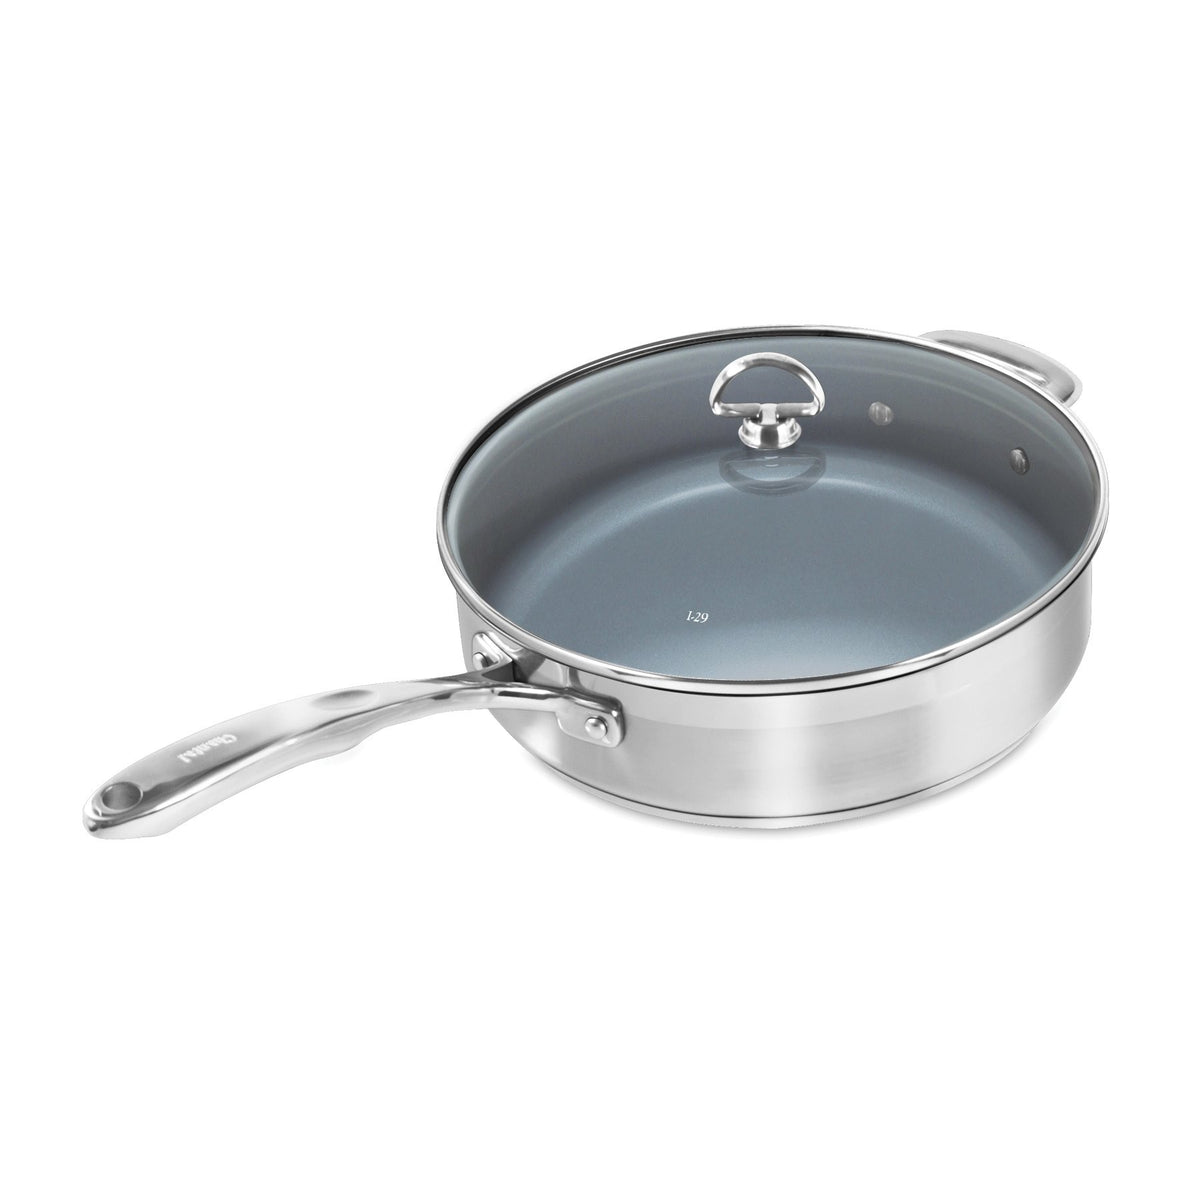 BEKA stainless steel saute pan CHEF 28 cm with 2 side handles and lid